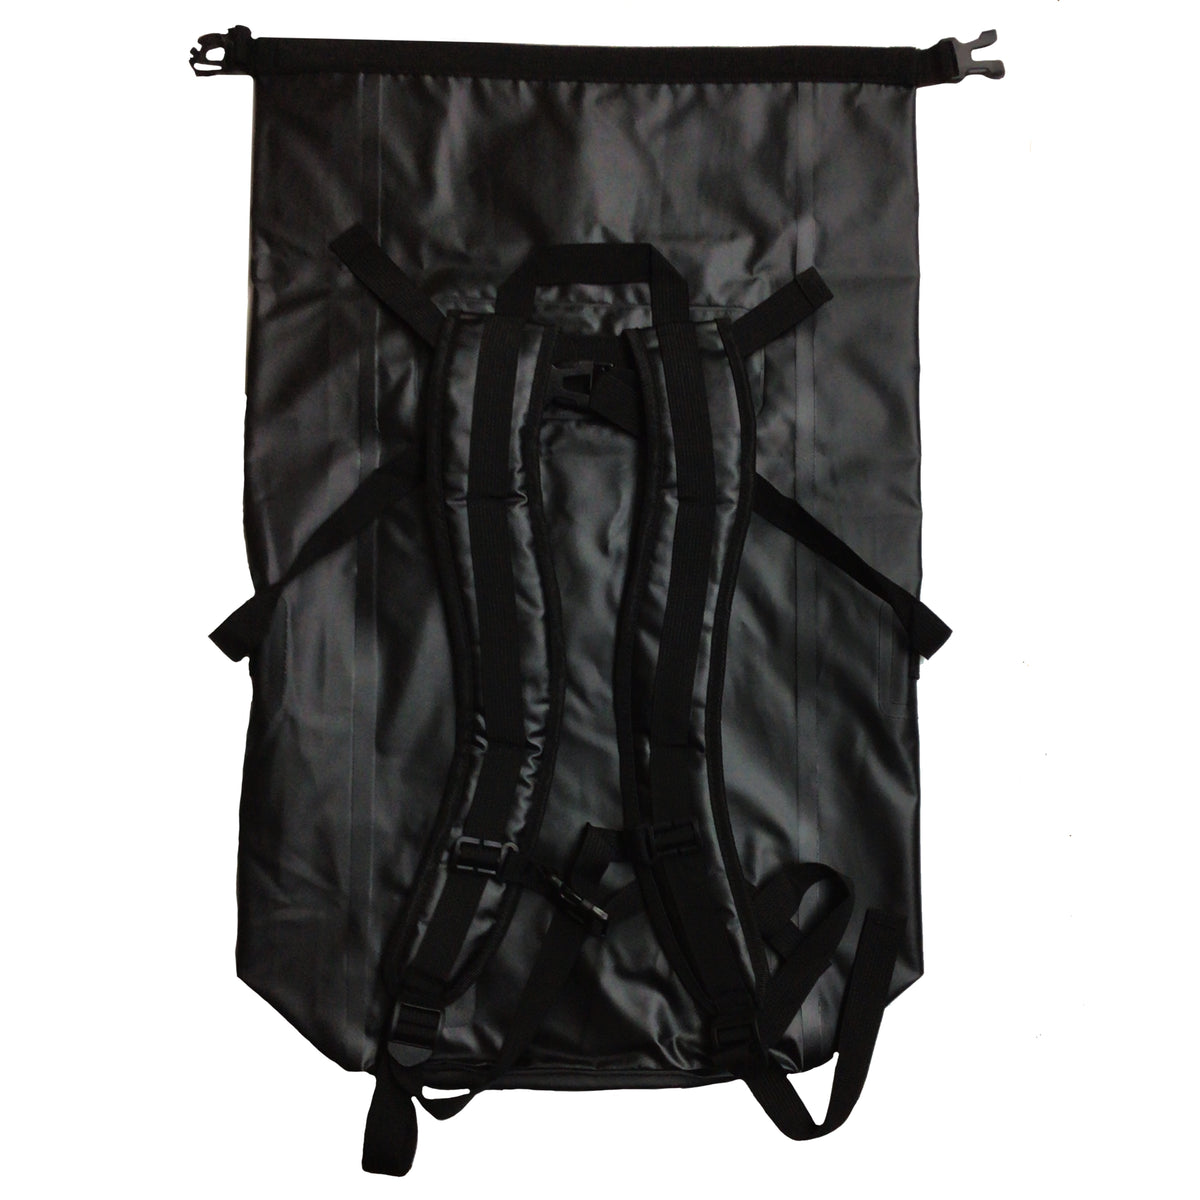 Stated Outfitters Dry Gear Bag